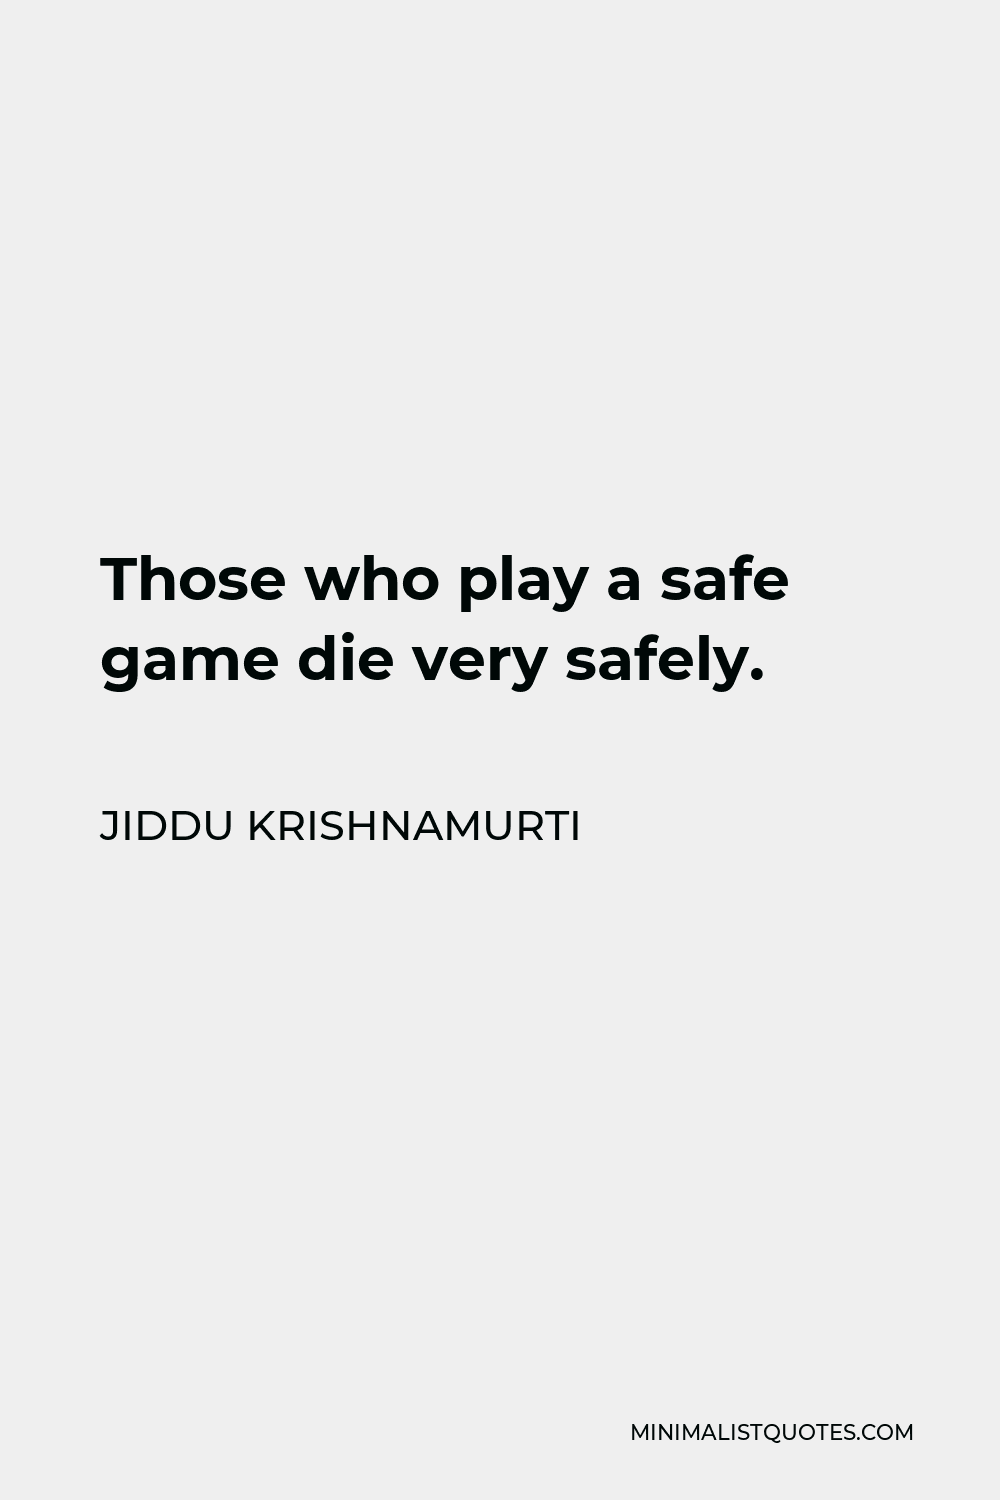 Jiddu Krishnamurti Quote - Those who play a safe game die very safely.